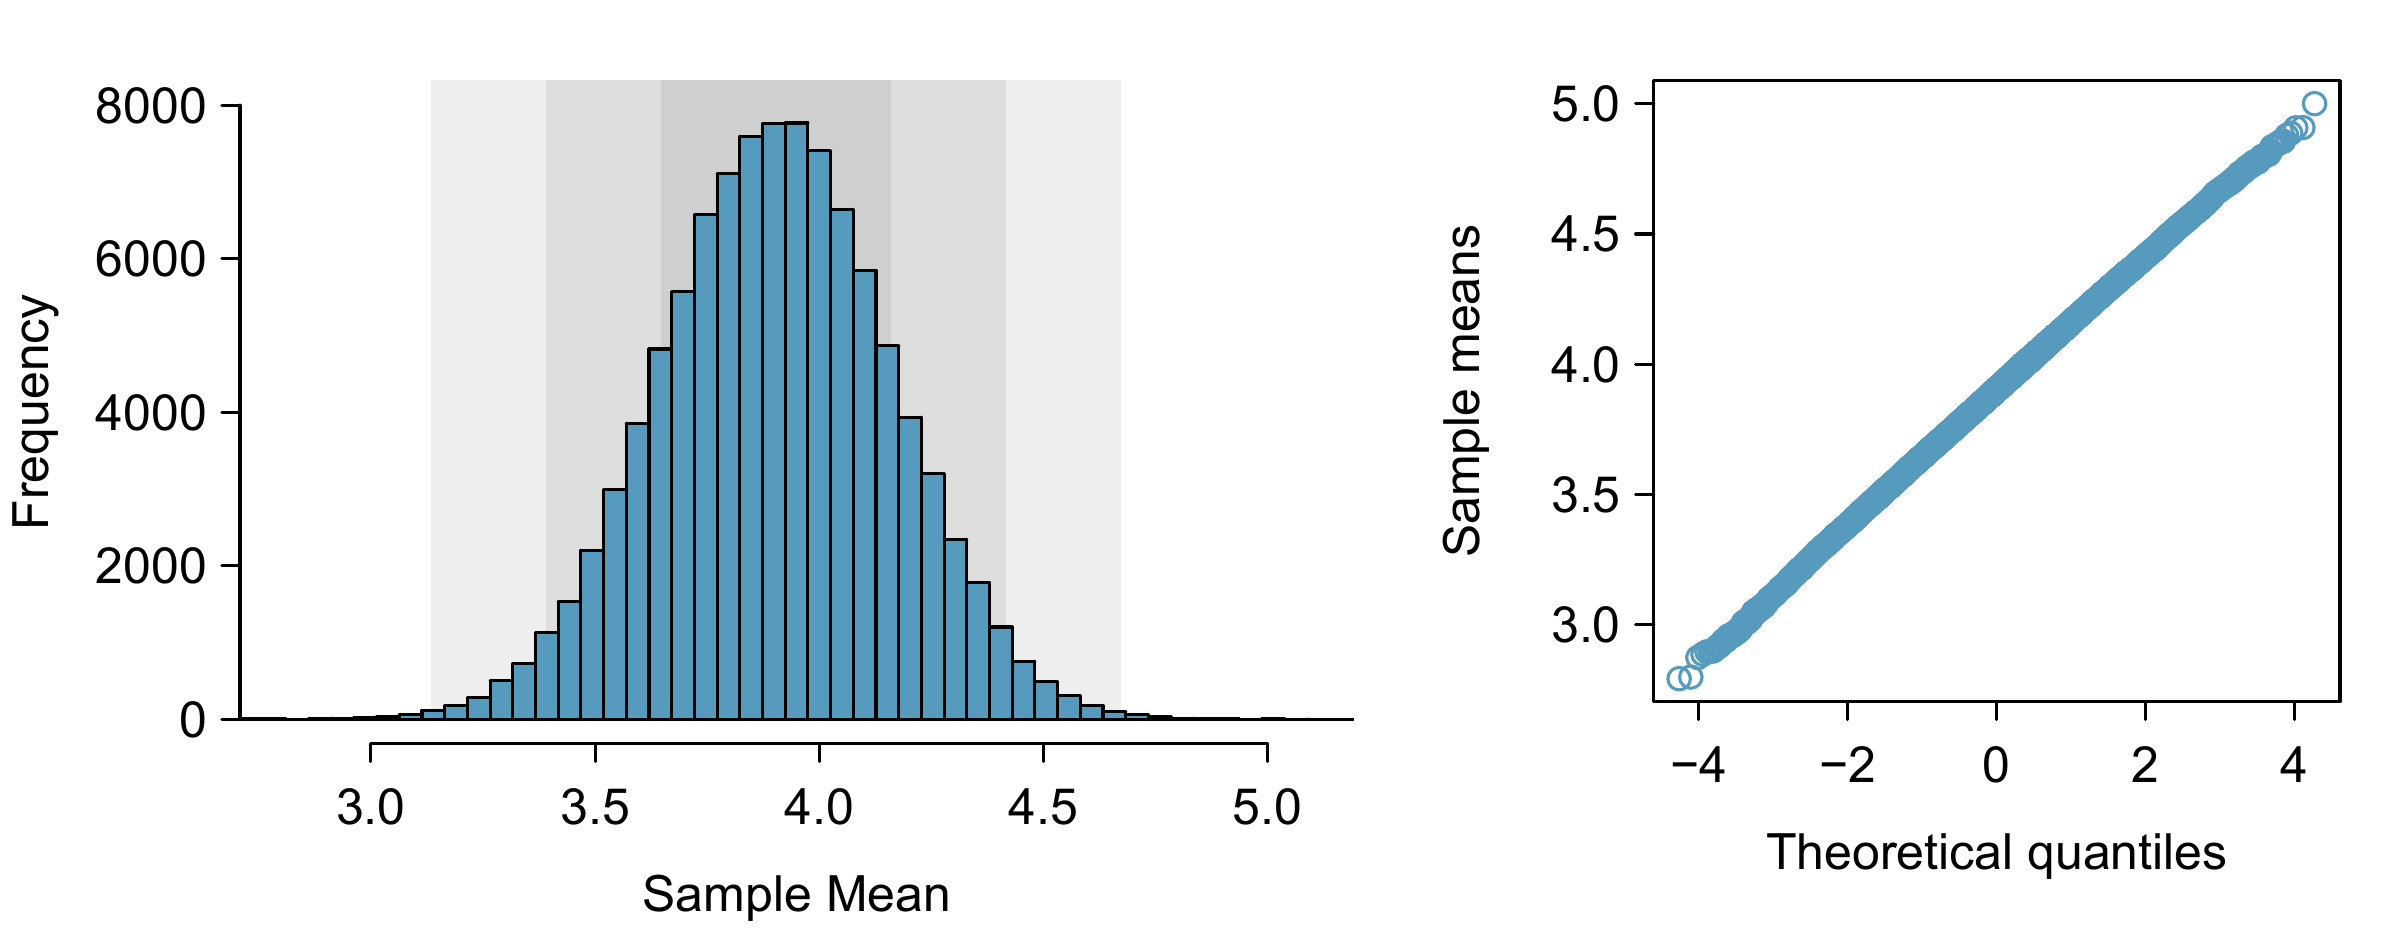 The left panel shows a histogram of the sample means for 100,000 different random samples. The right panel shows a normal probability plot of those sample means.